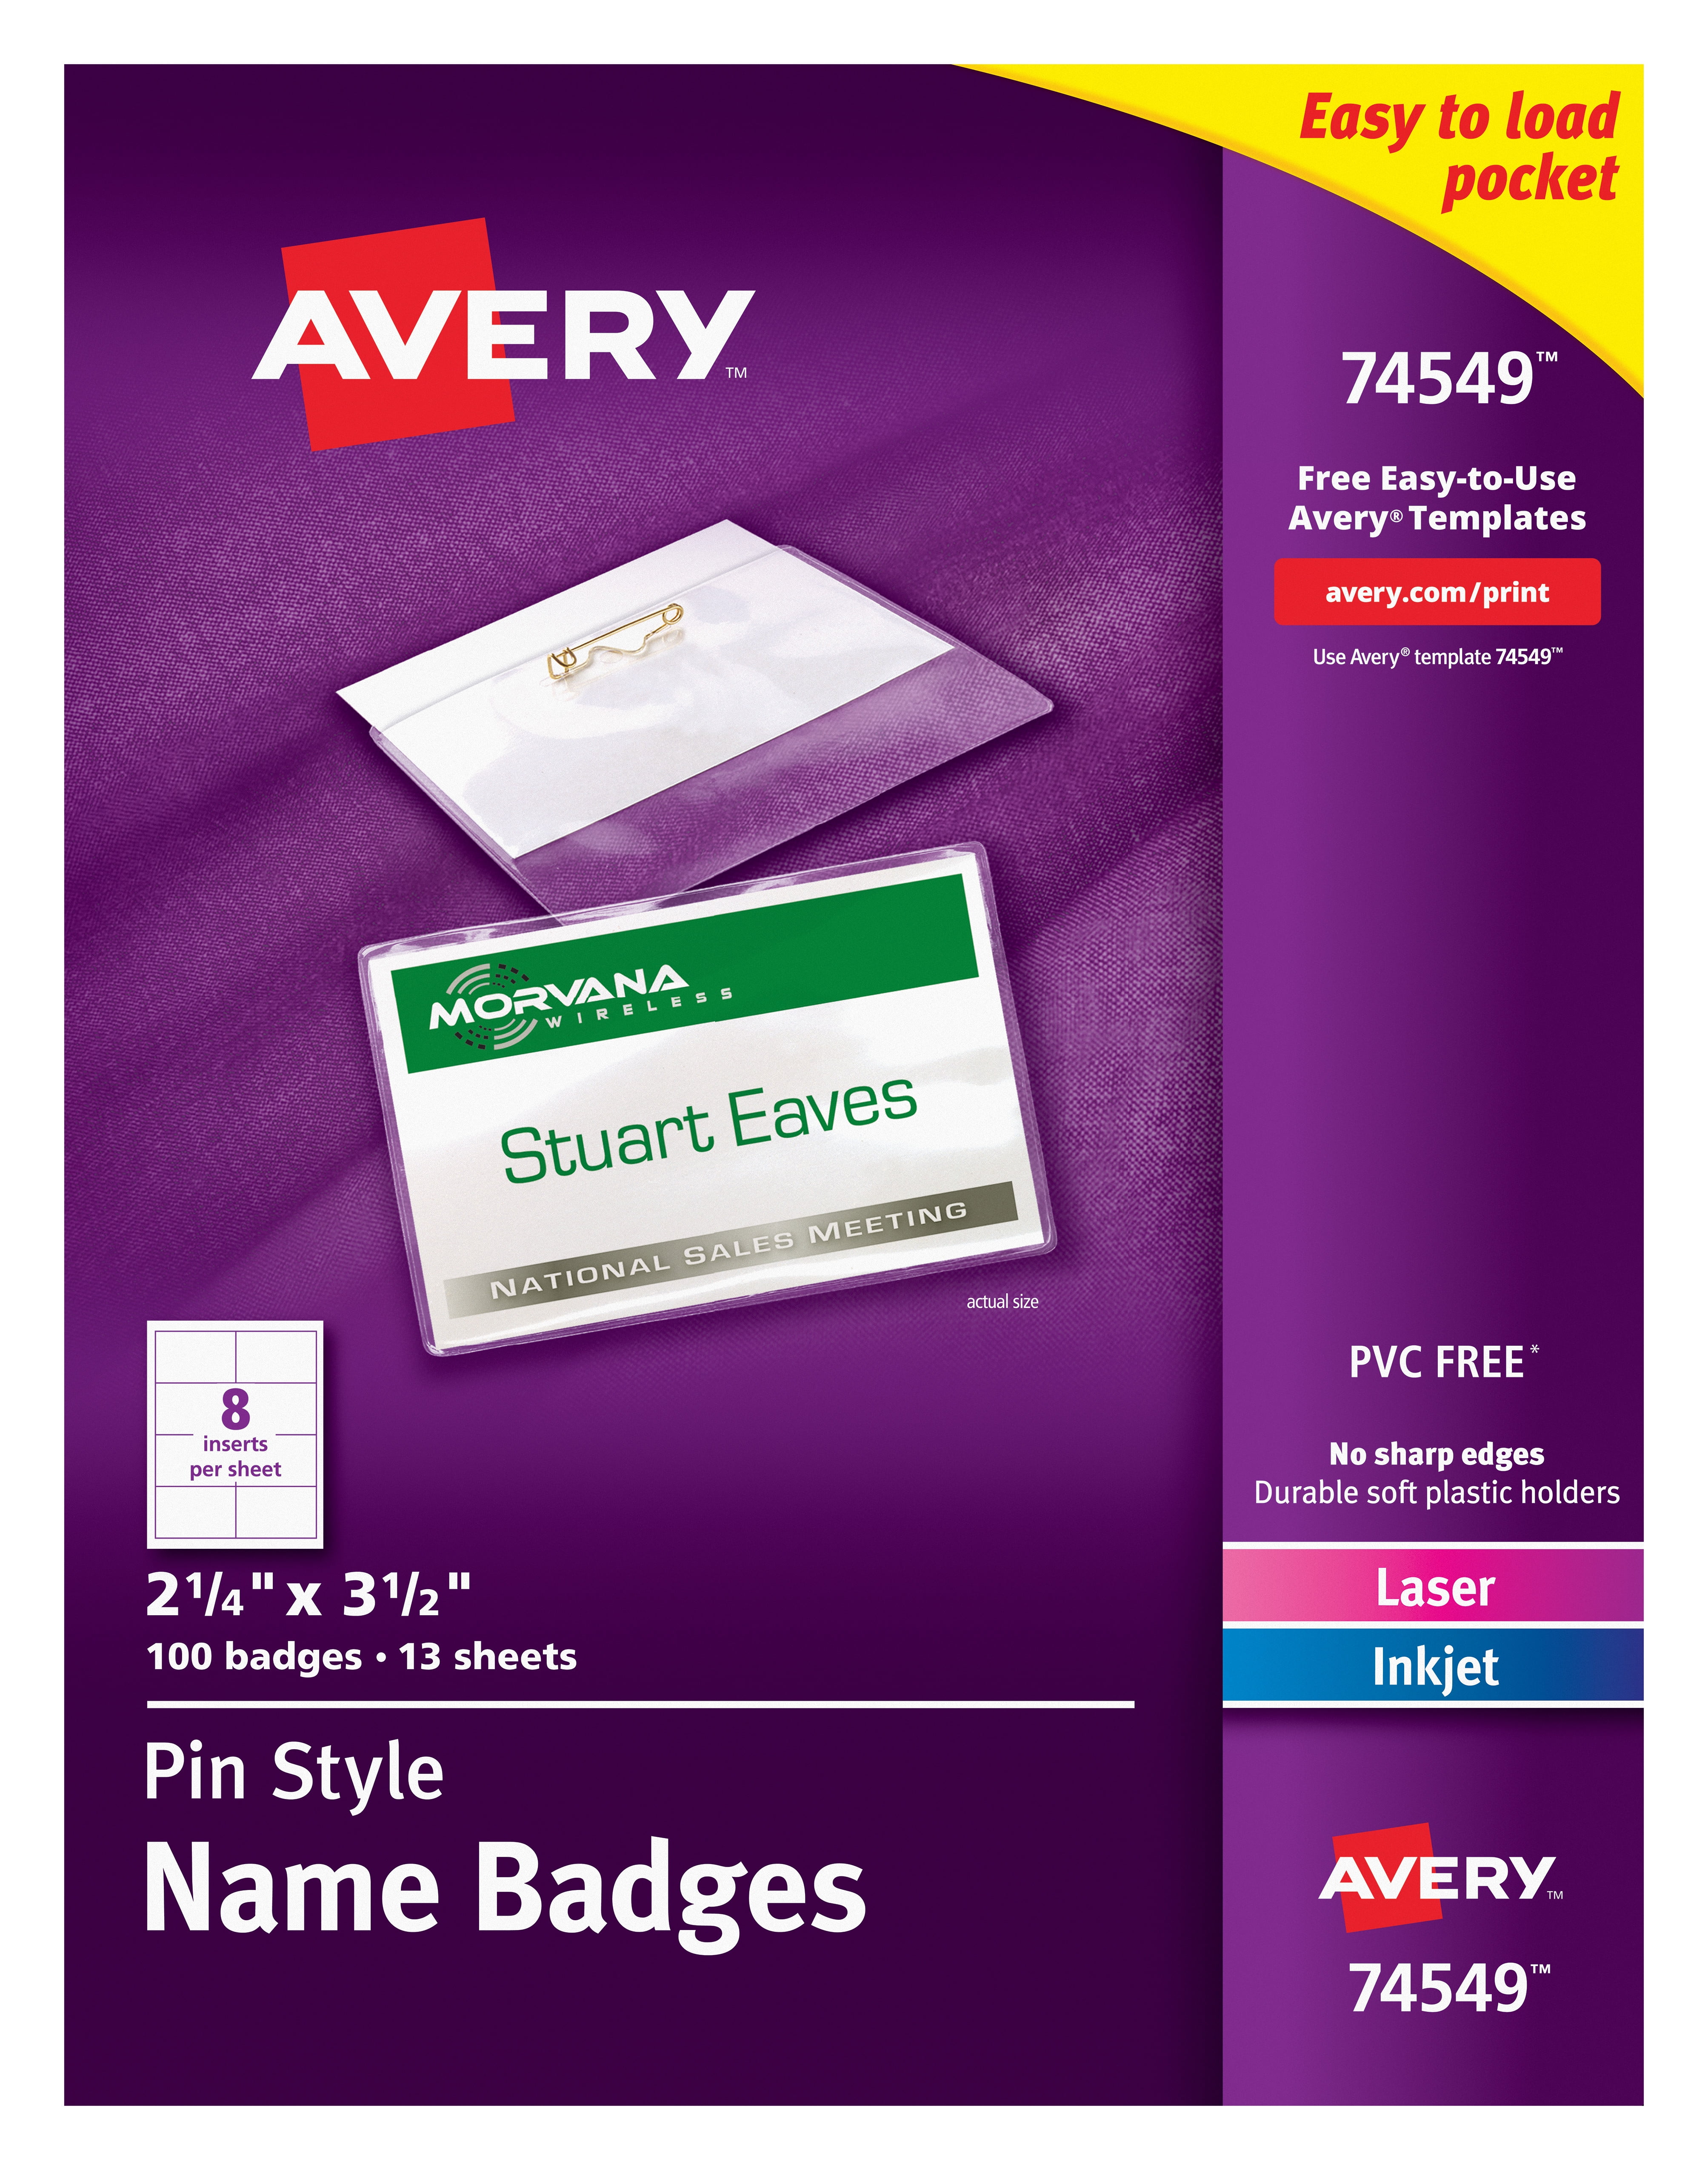 Avery Pin Style Name Badges, 21/4" x 31/2", 100 Badges (74549